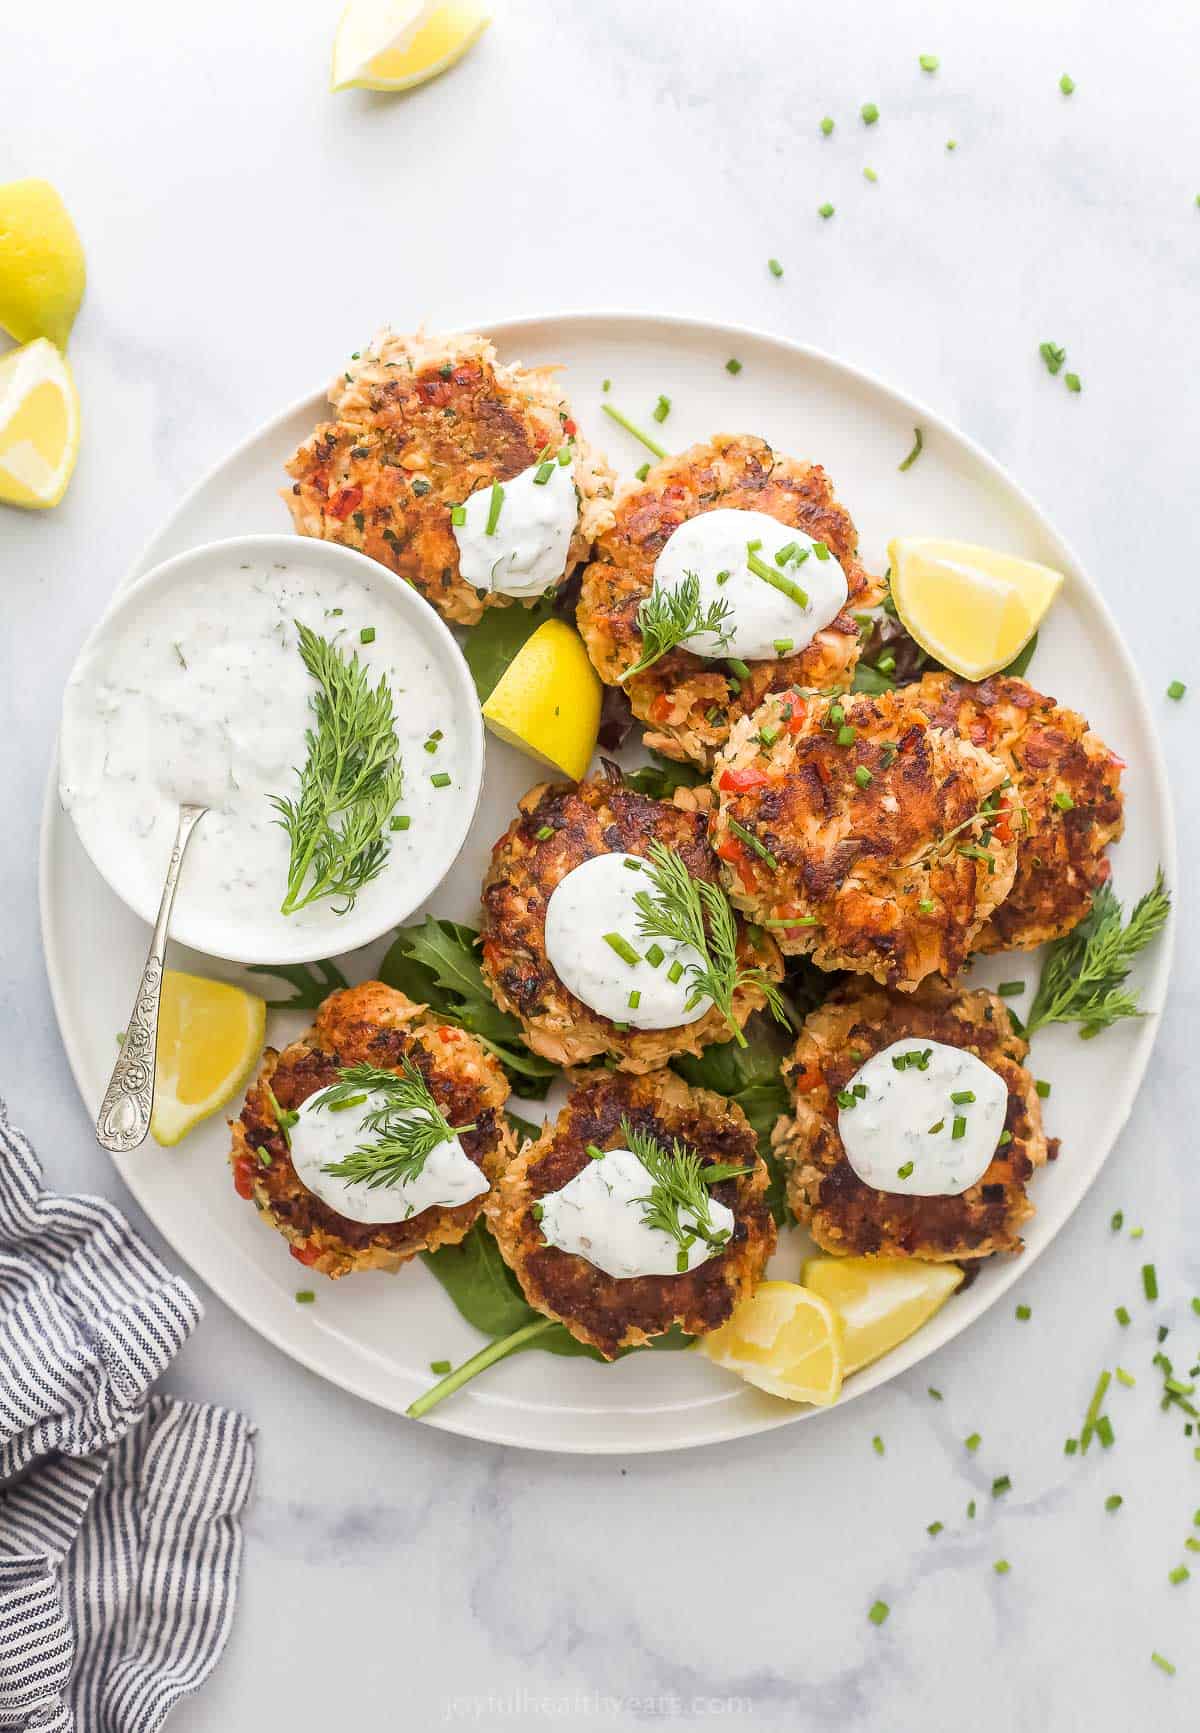 Salmon cakes with lemon dill sauce on the side.